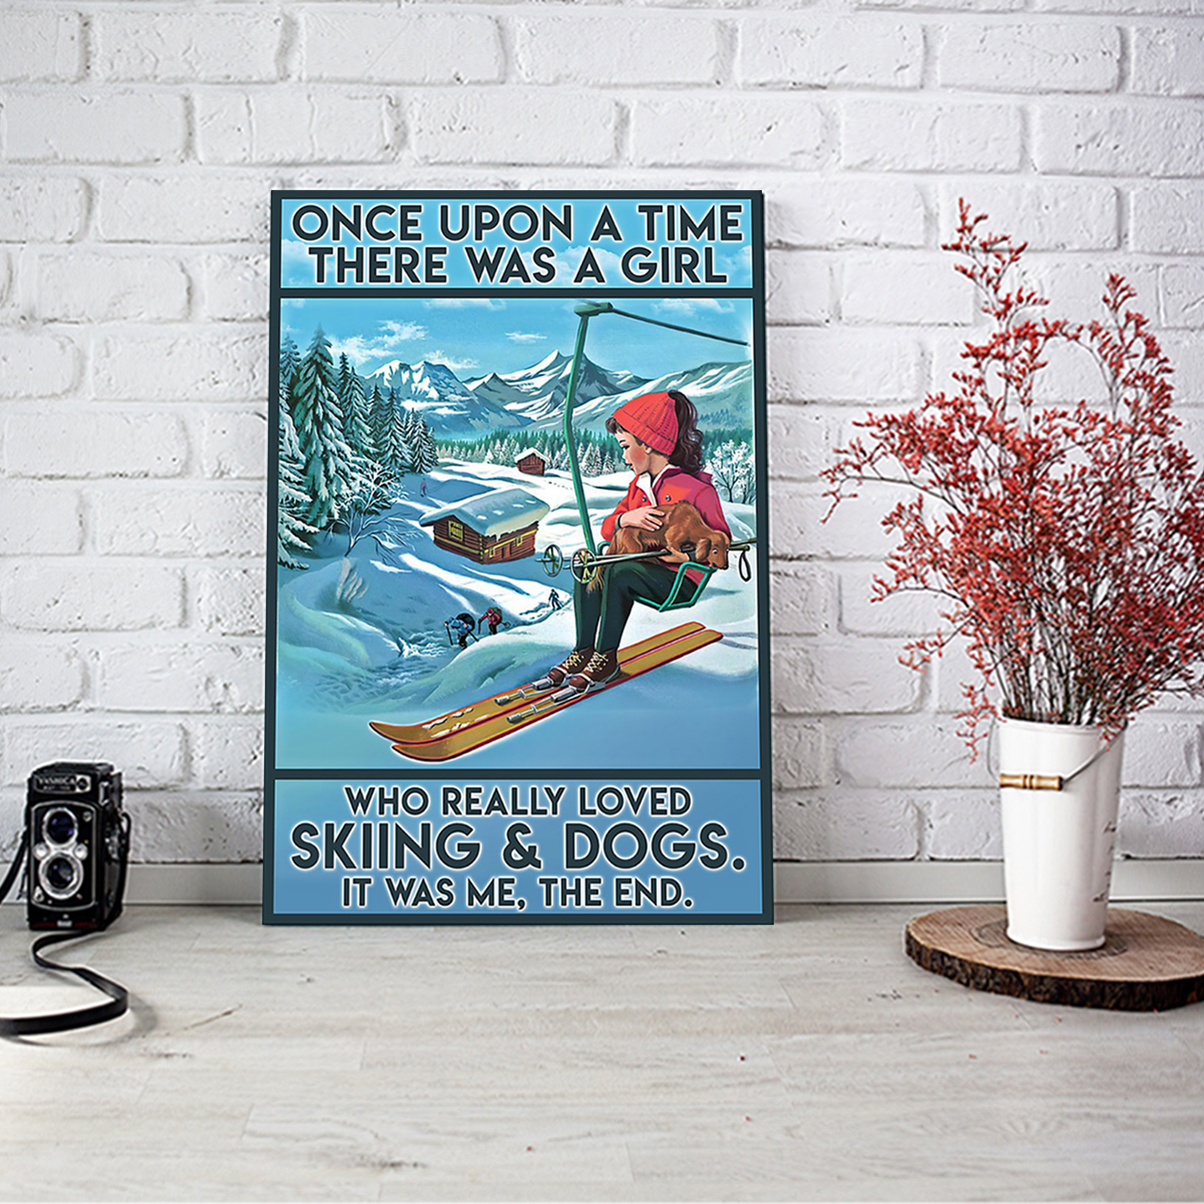 Once upon a time there was a girl who really loved skiing and dogs poster A3